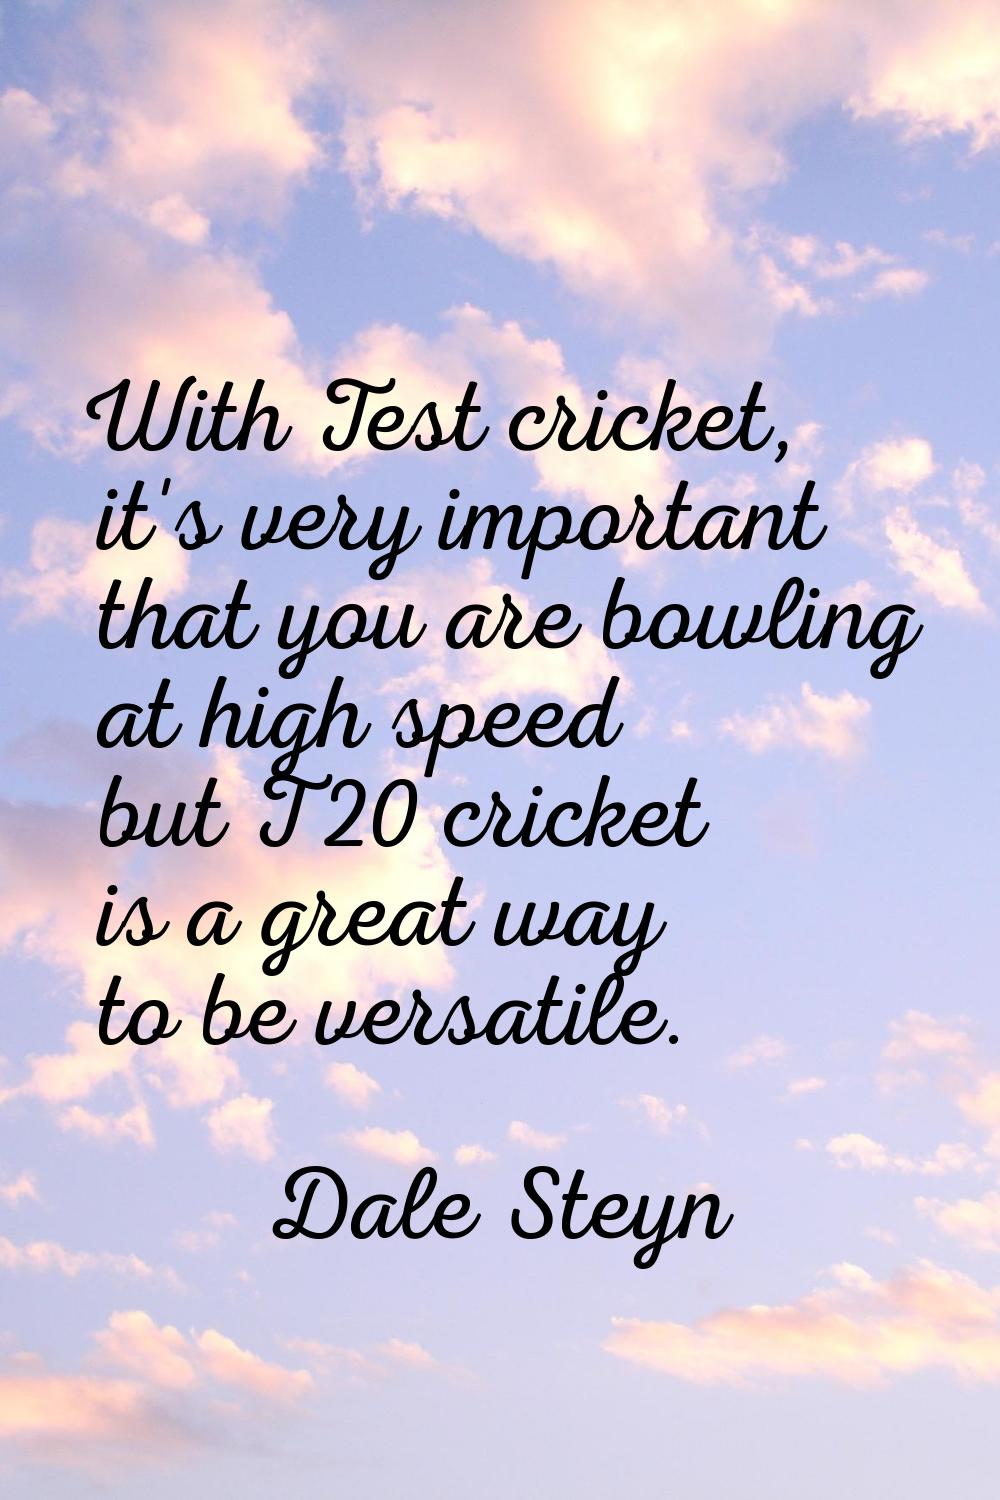 With Test cricket, it's very important that you are bowling at high speed but T20 cricket is a grea